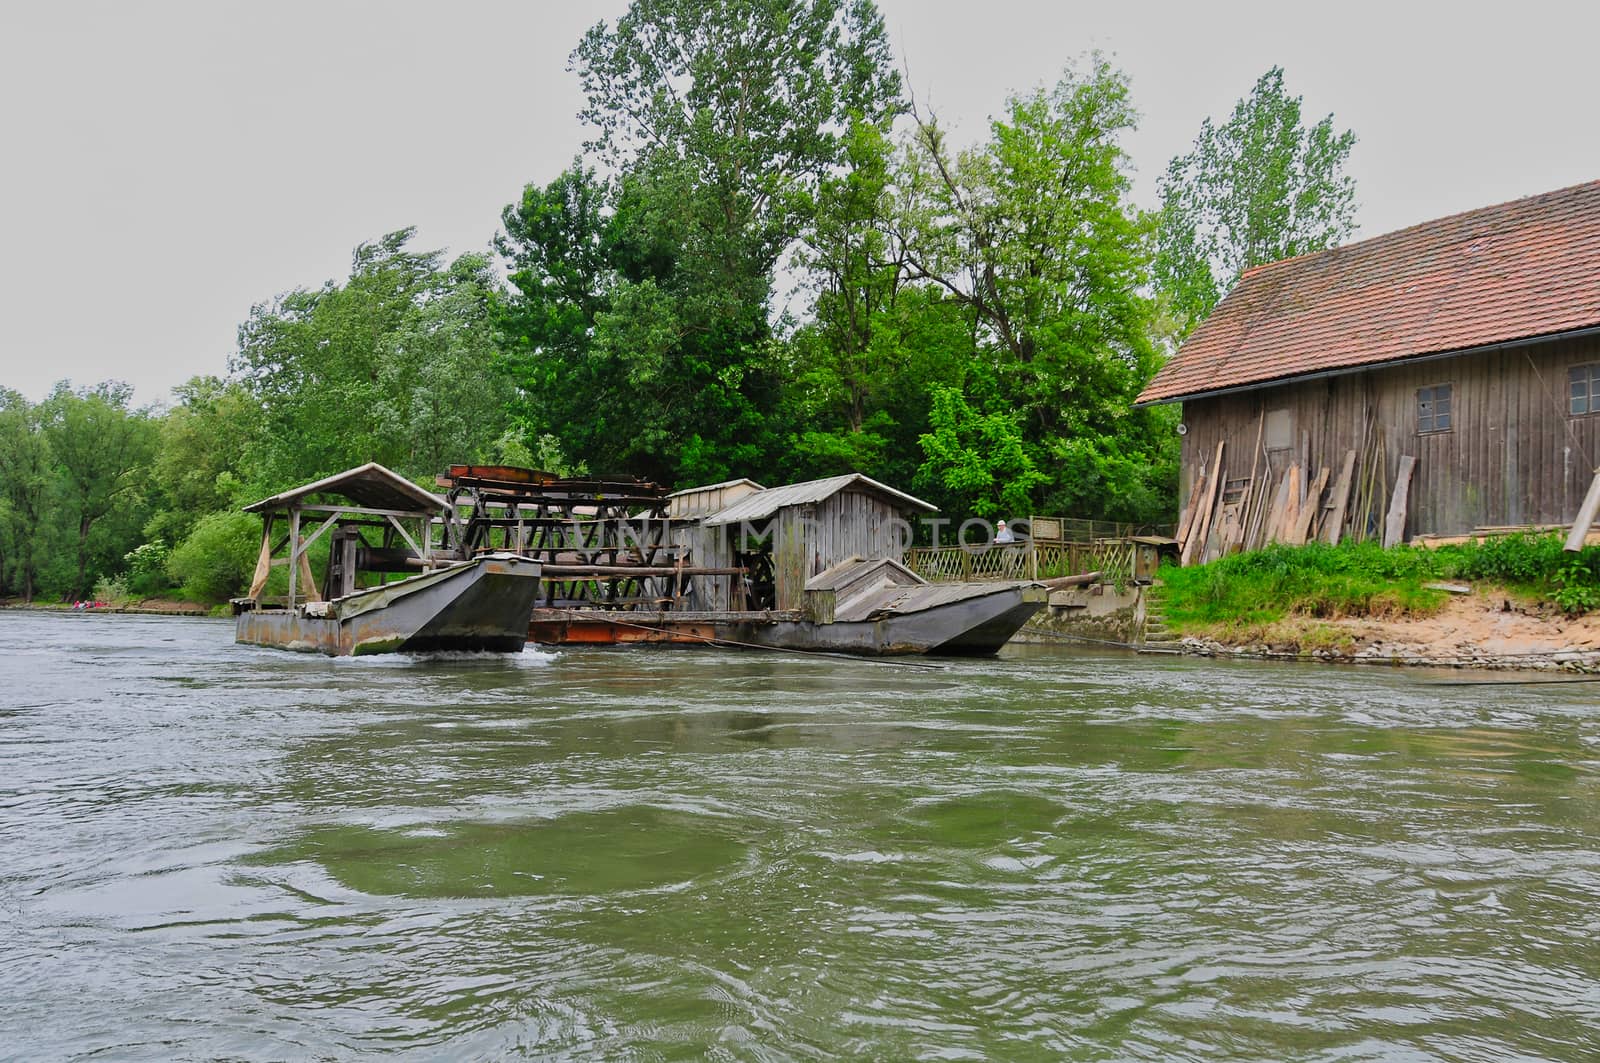 Unique traditional boat mill on a river by asafaric